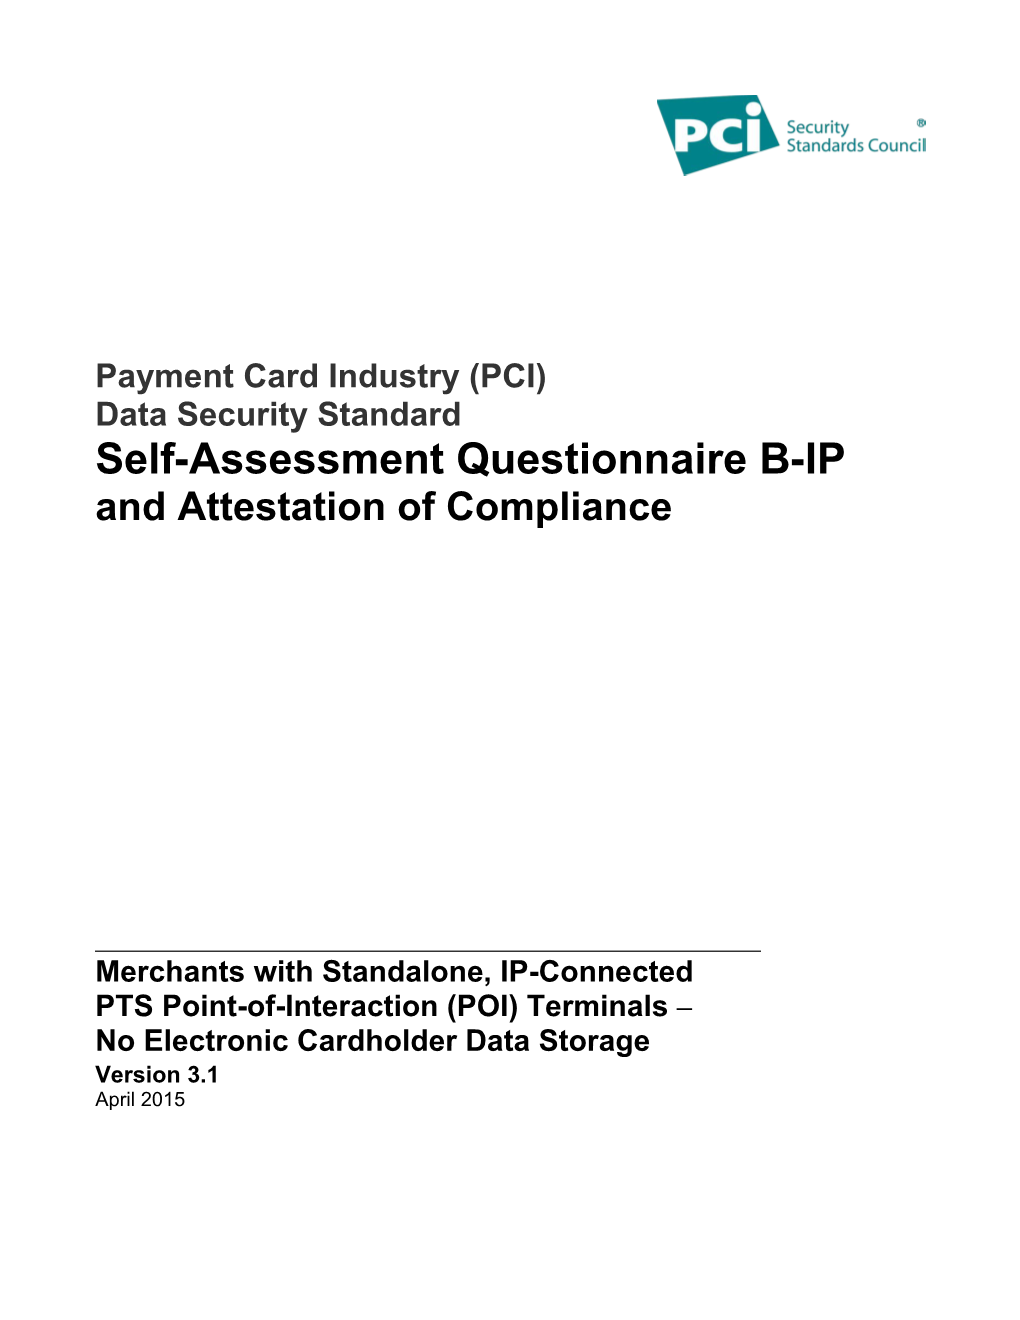 Payment Card Industry (PCI) Data Security Standard Self-Assessment Questionnaire B-IP